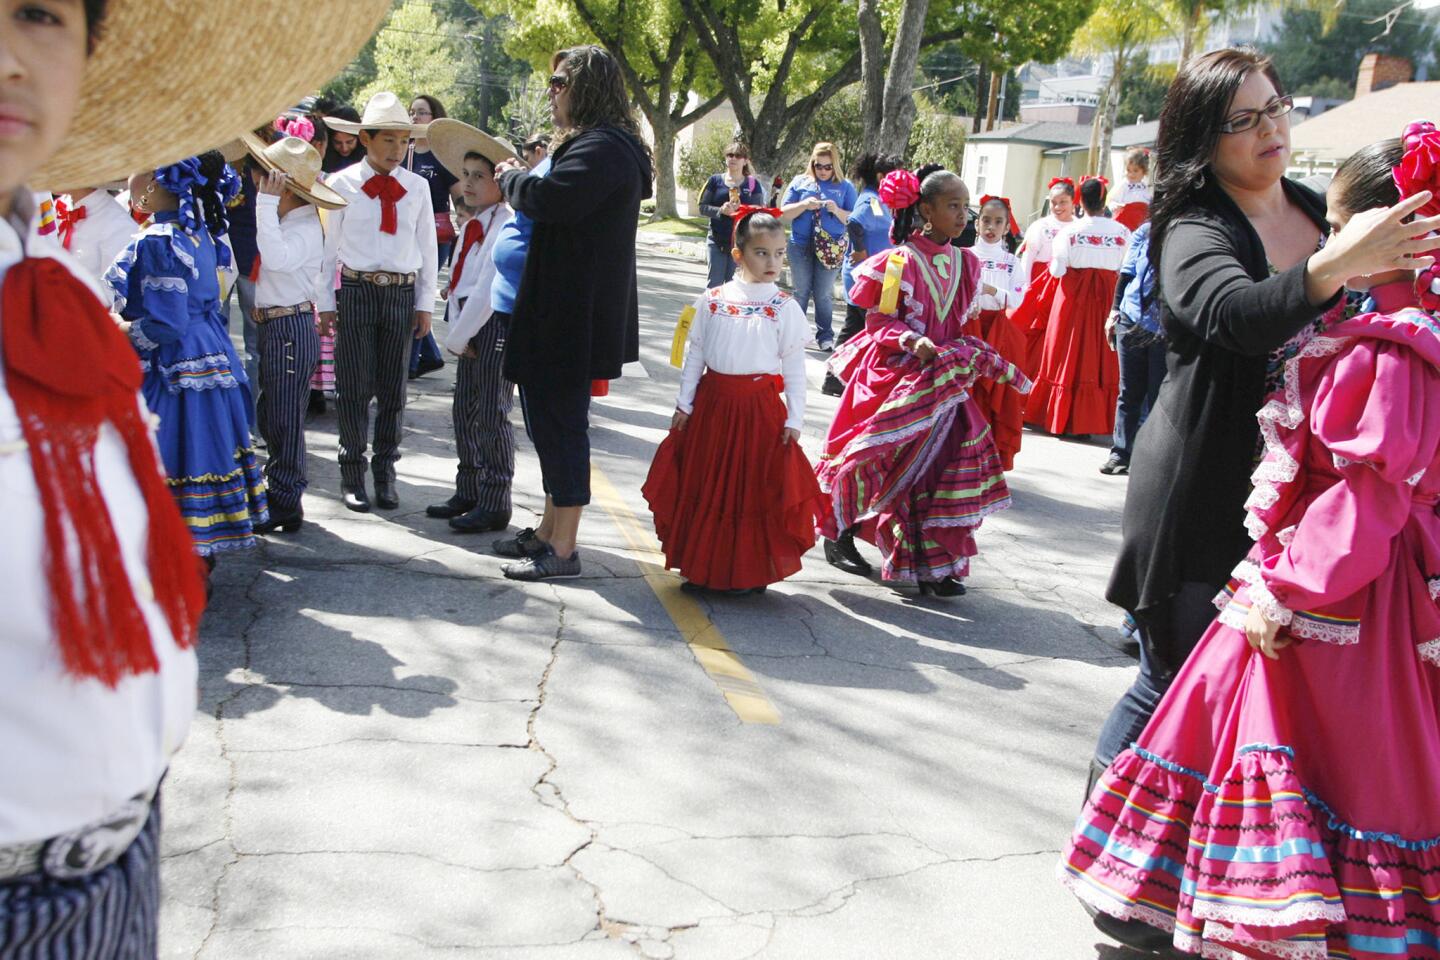 Ballet Folklorico Mexico Azteca dancers participate in Burbank on Parade, which took place on Olive Ave. between Keystone St. and Lomita St. on Saturday, April 14, 2012.